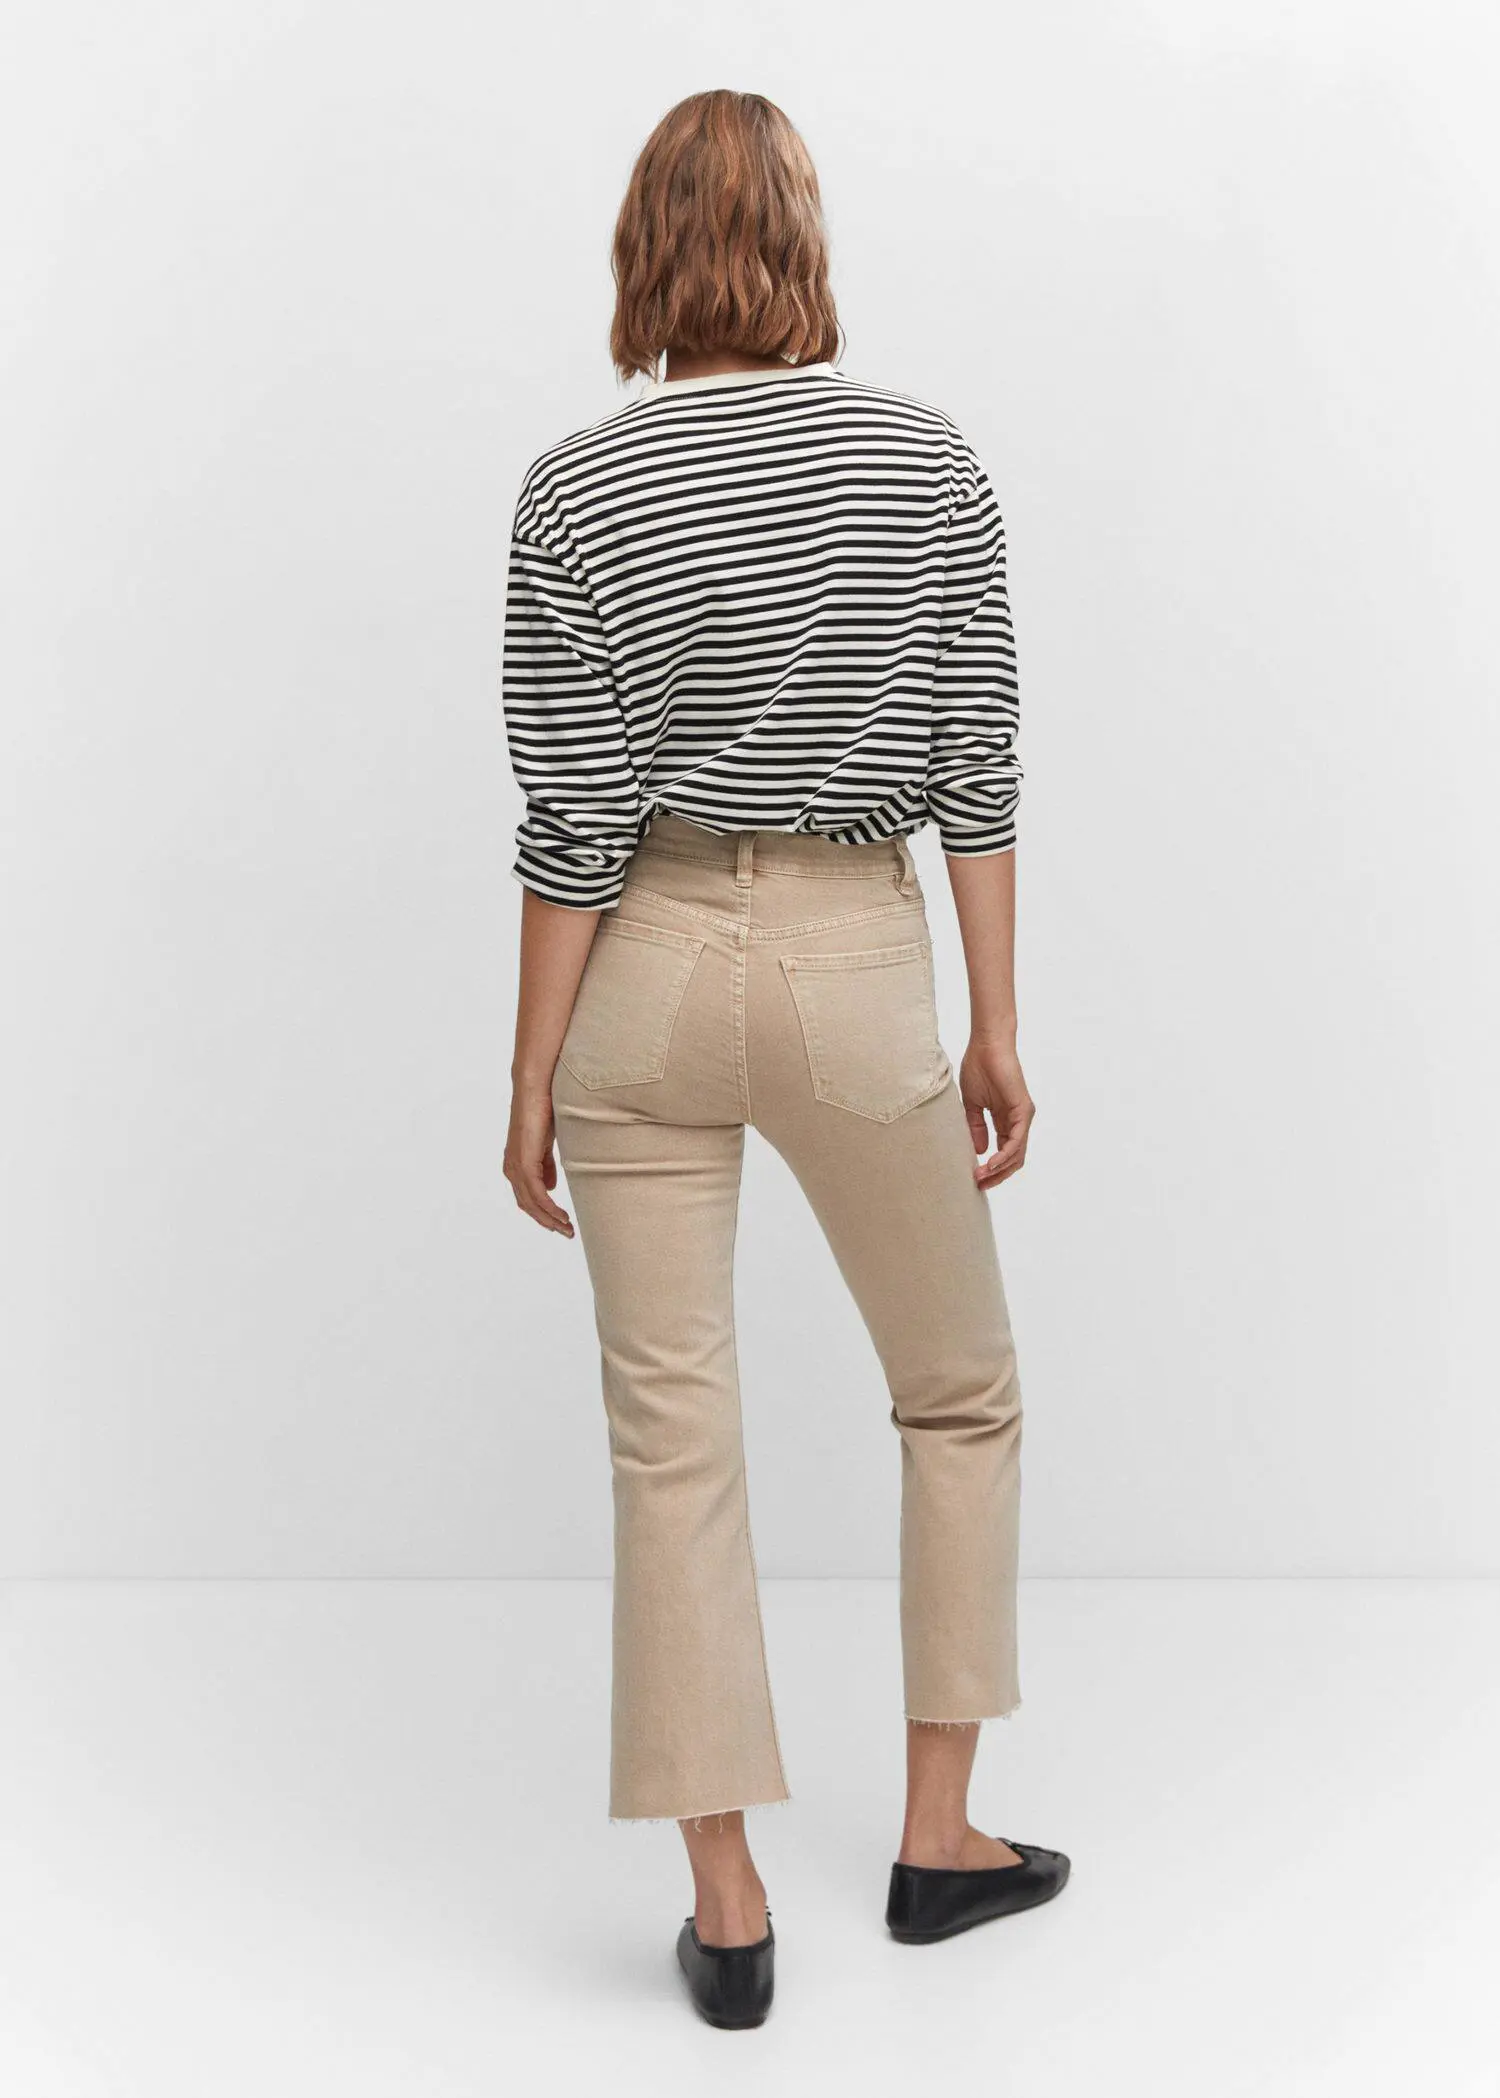 Mango Crop flared jeans. a woman wearing beige pants and a striped shirt. 